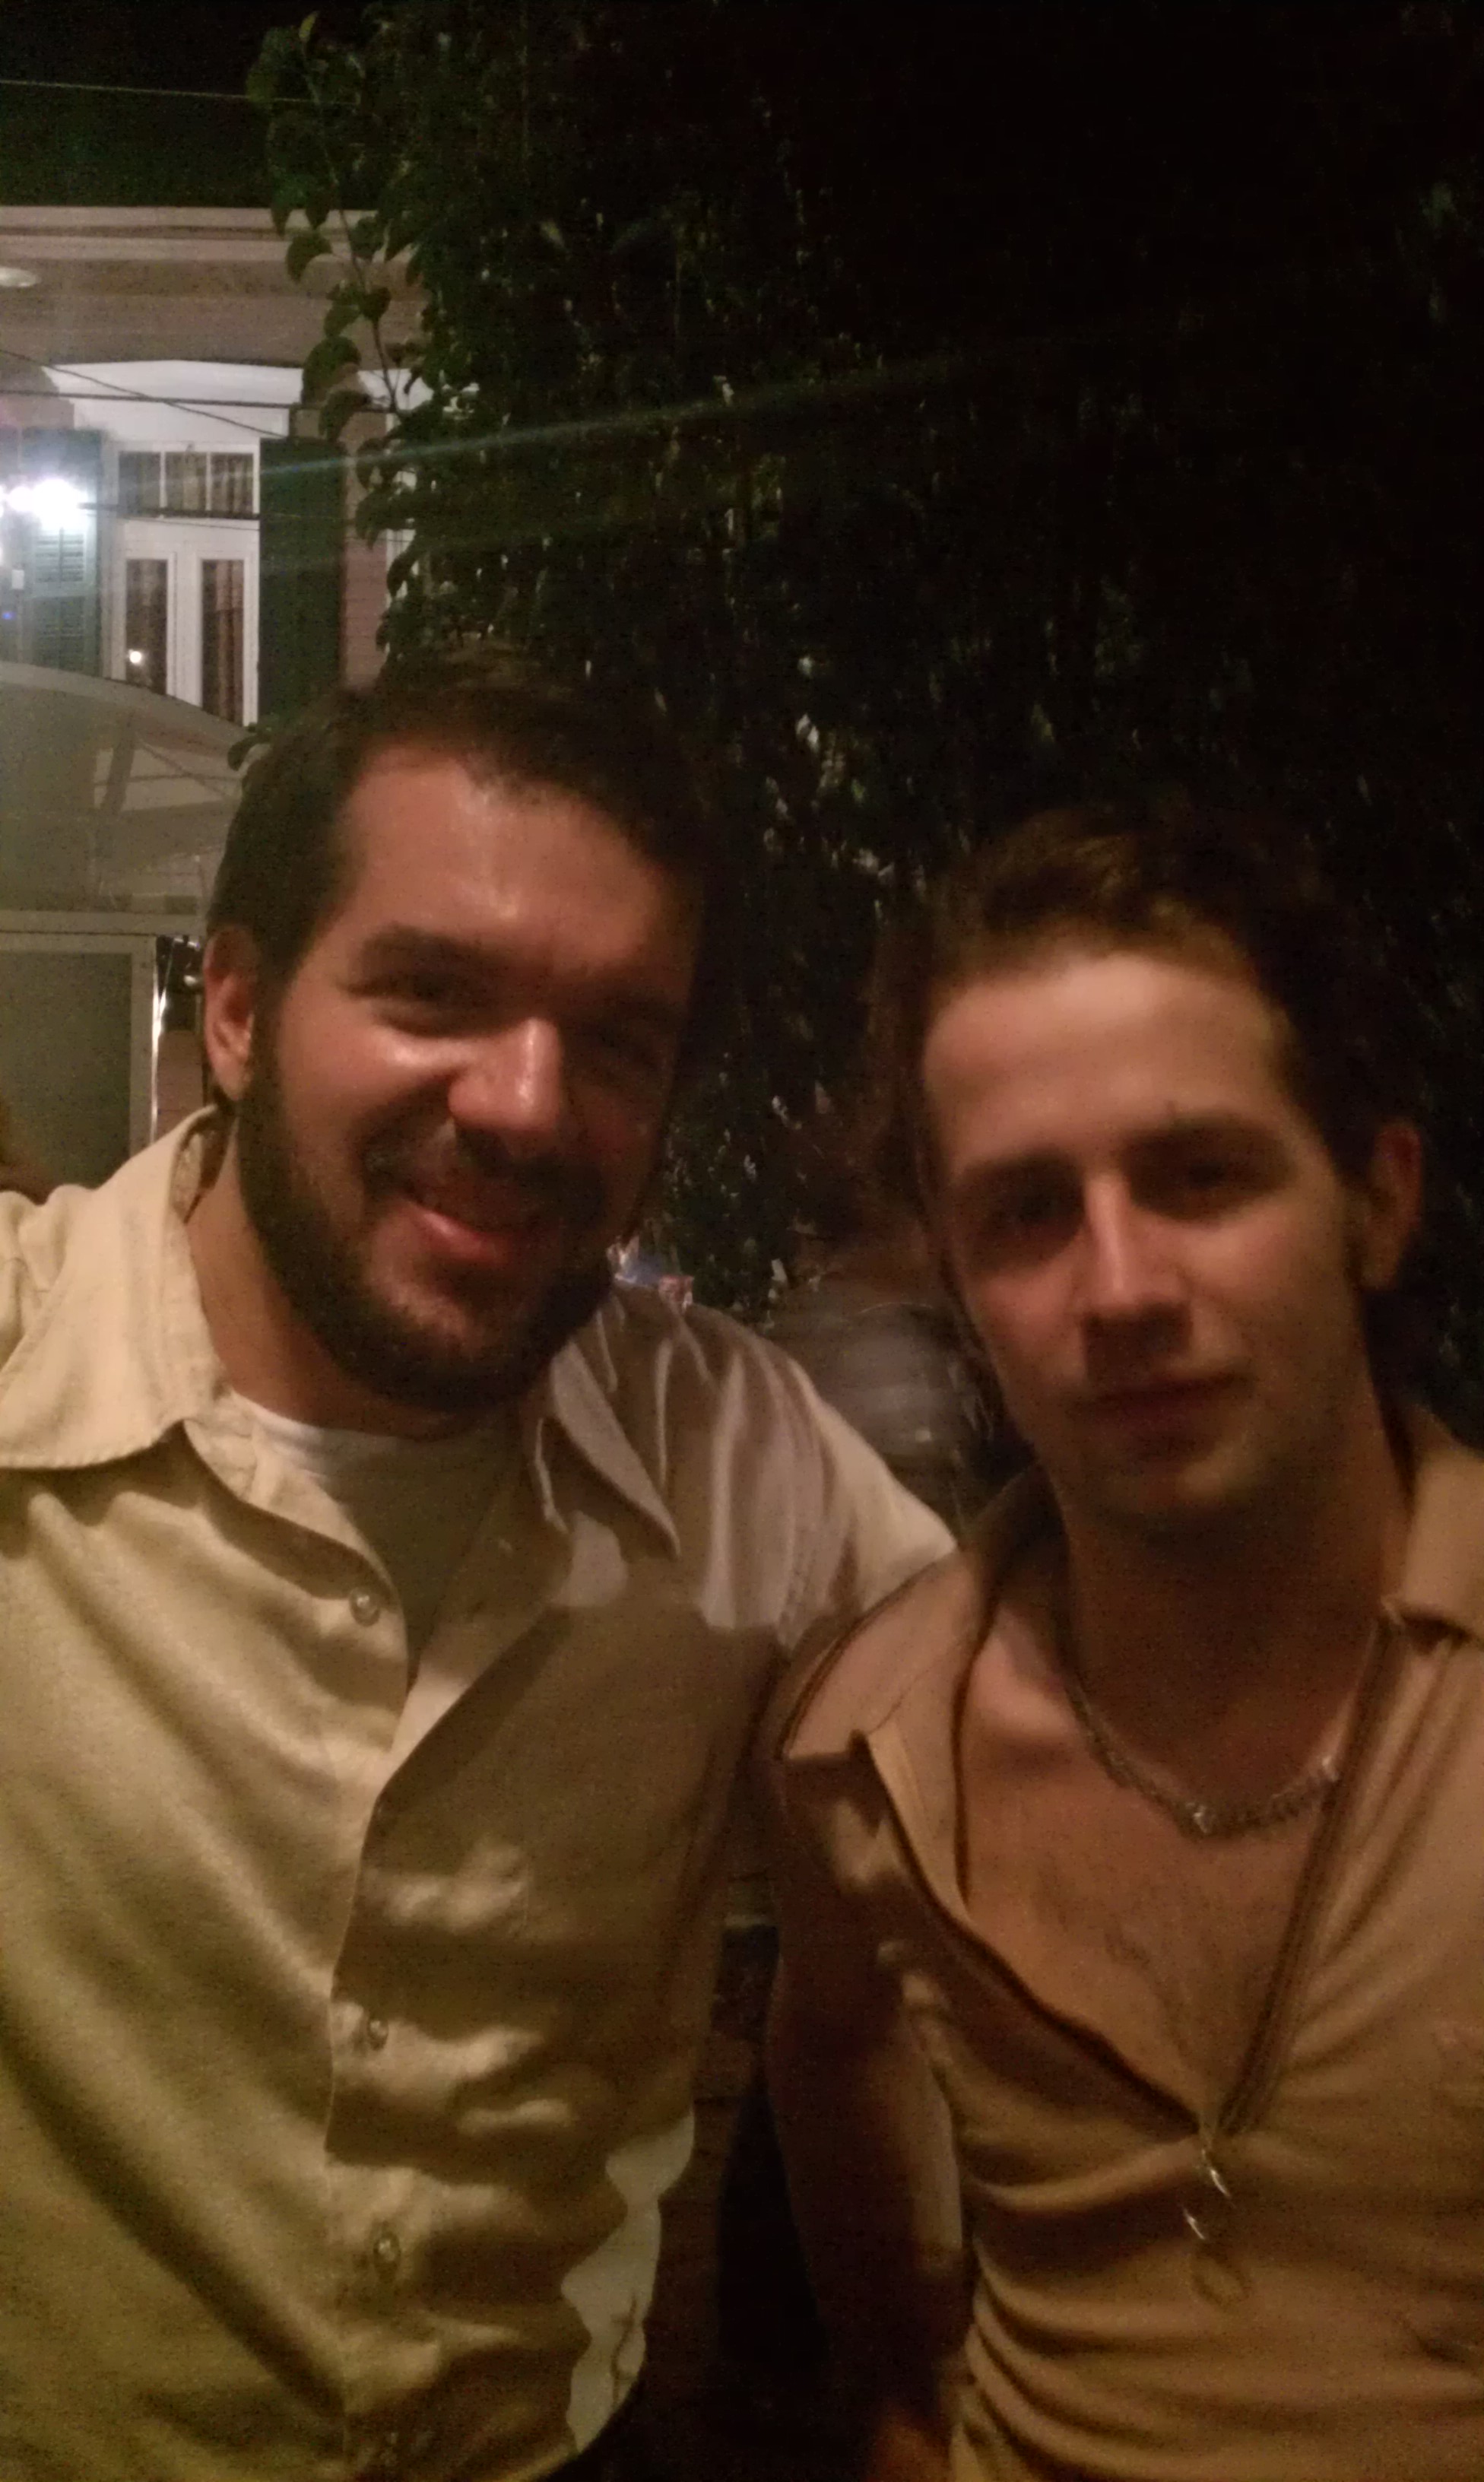 On Empire State set with Michael Angarano